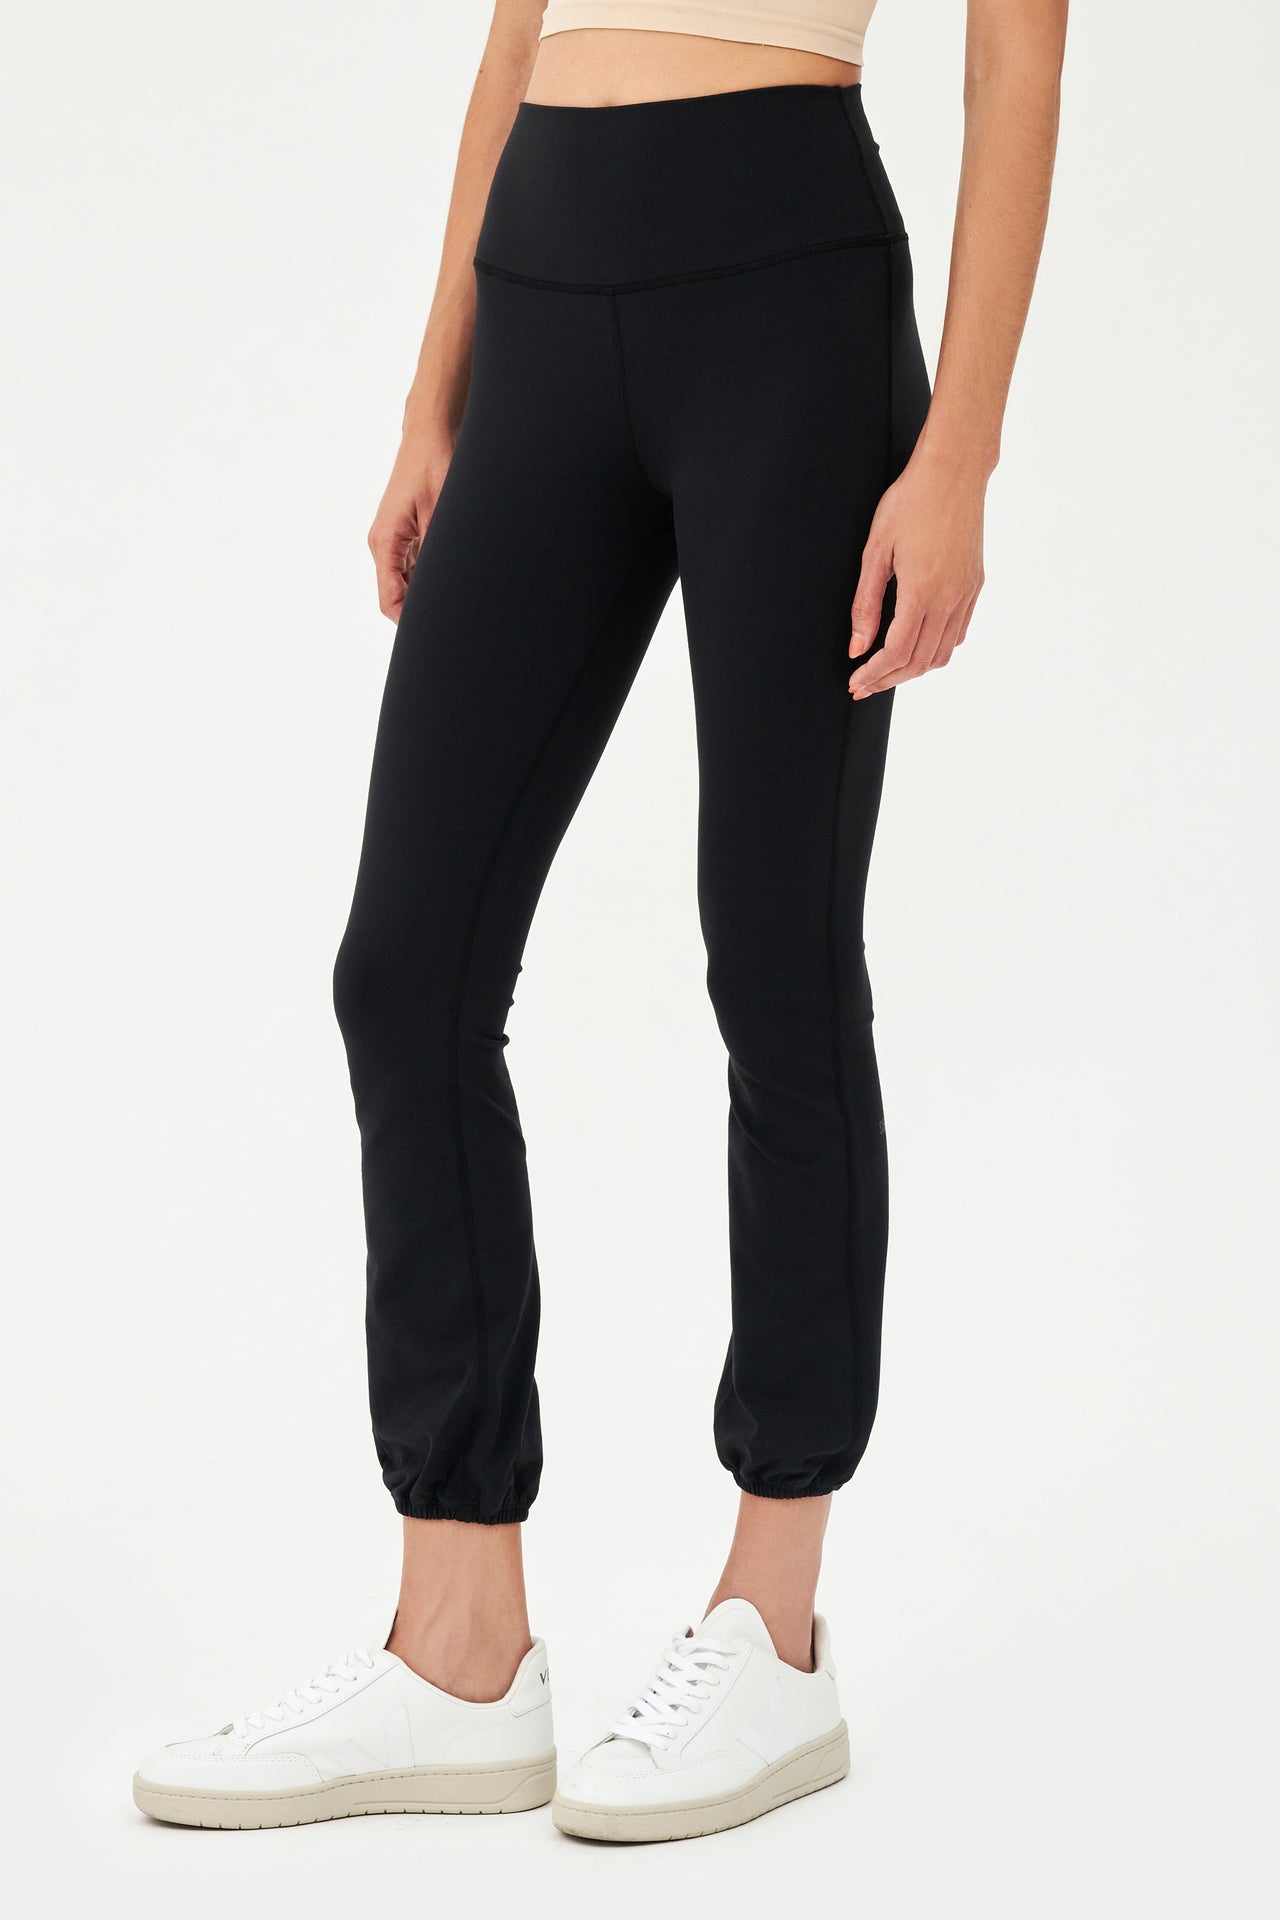 A woman wearing SPLITS59's Icon High Waist Supplex Legging in Black and a white top.